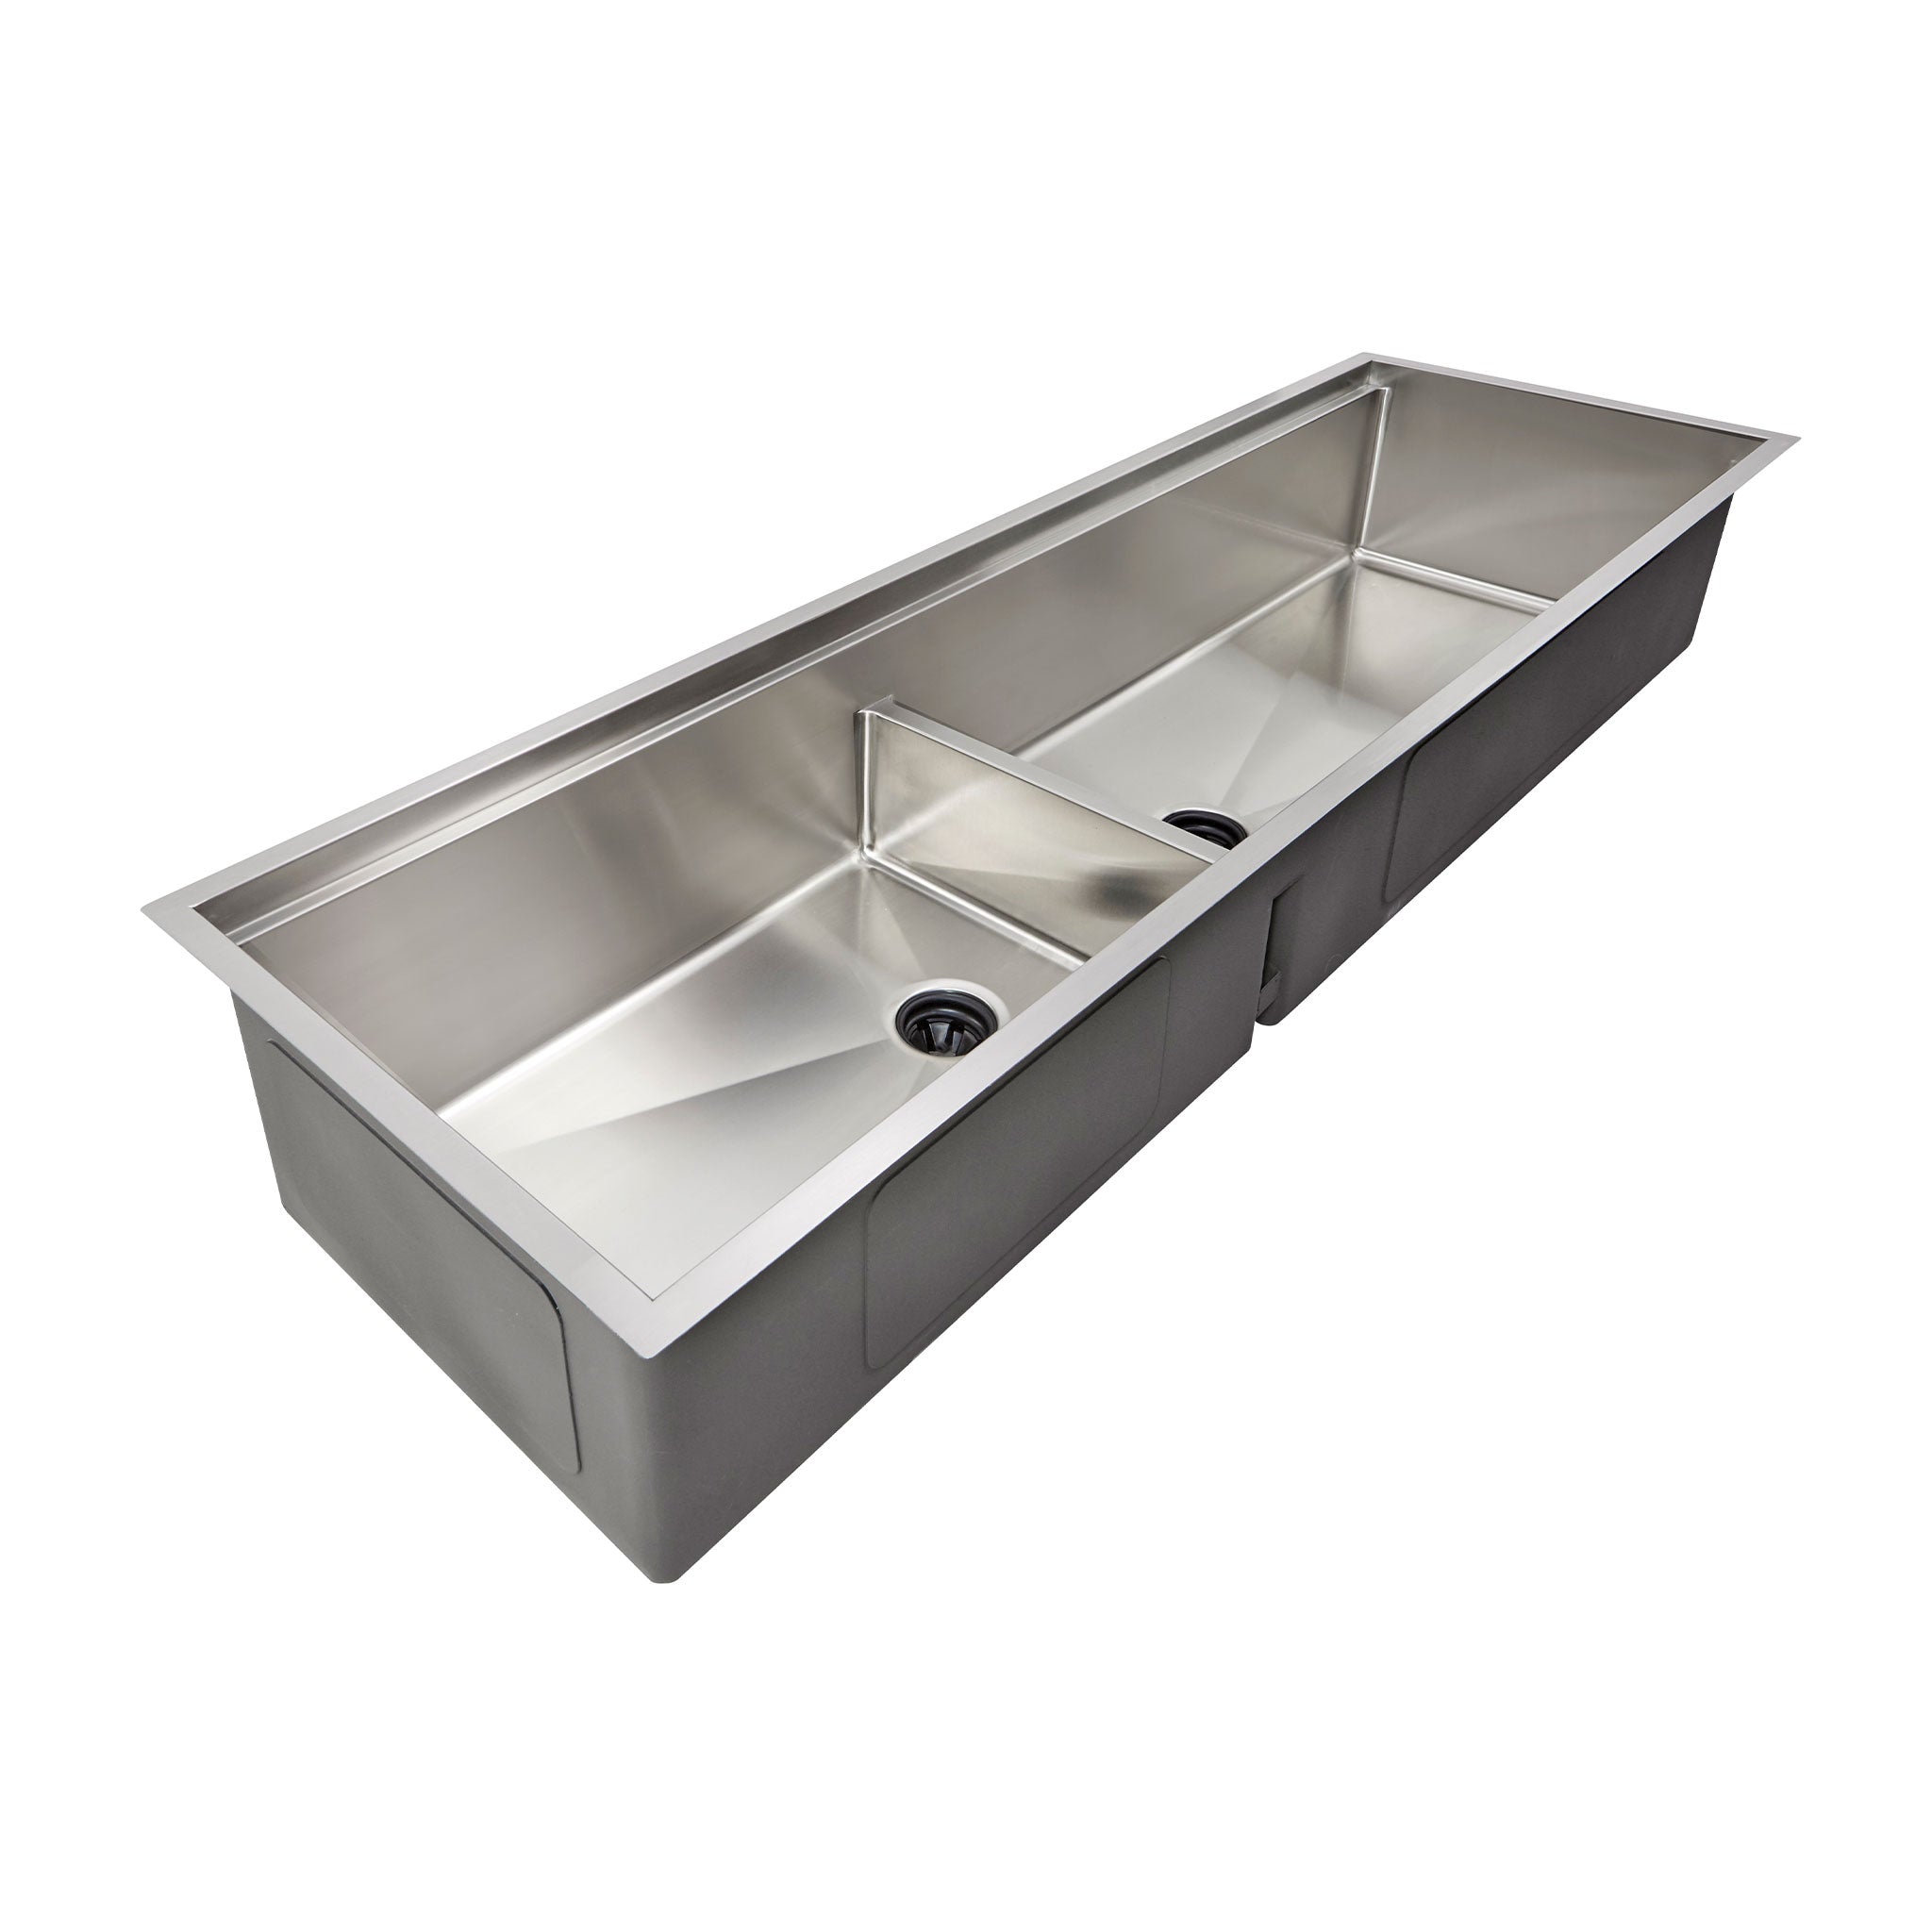 63" oversized Double Bowl Undermount Ledge workstation Sink perfect for two faucets and double tiers and multiple users.